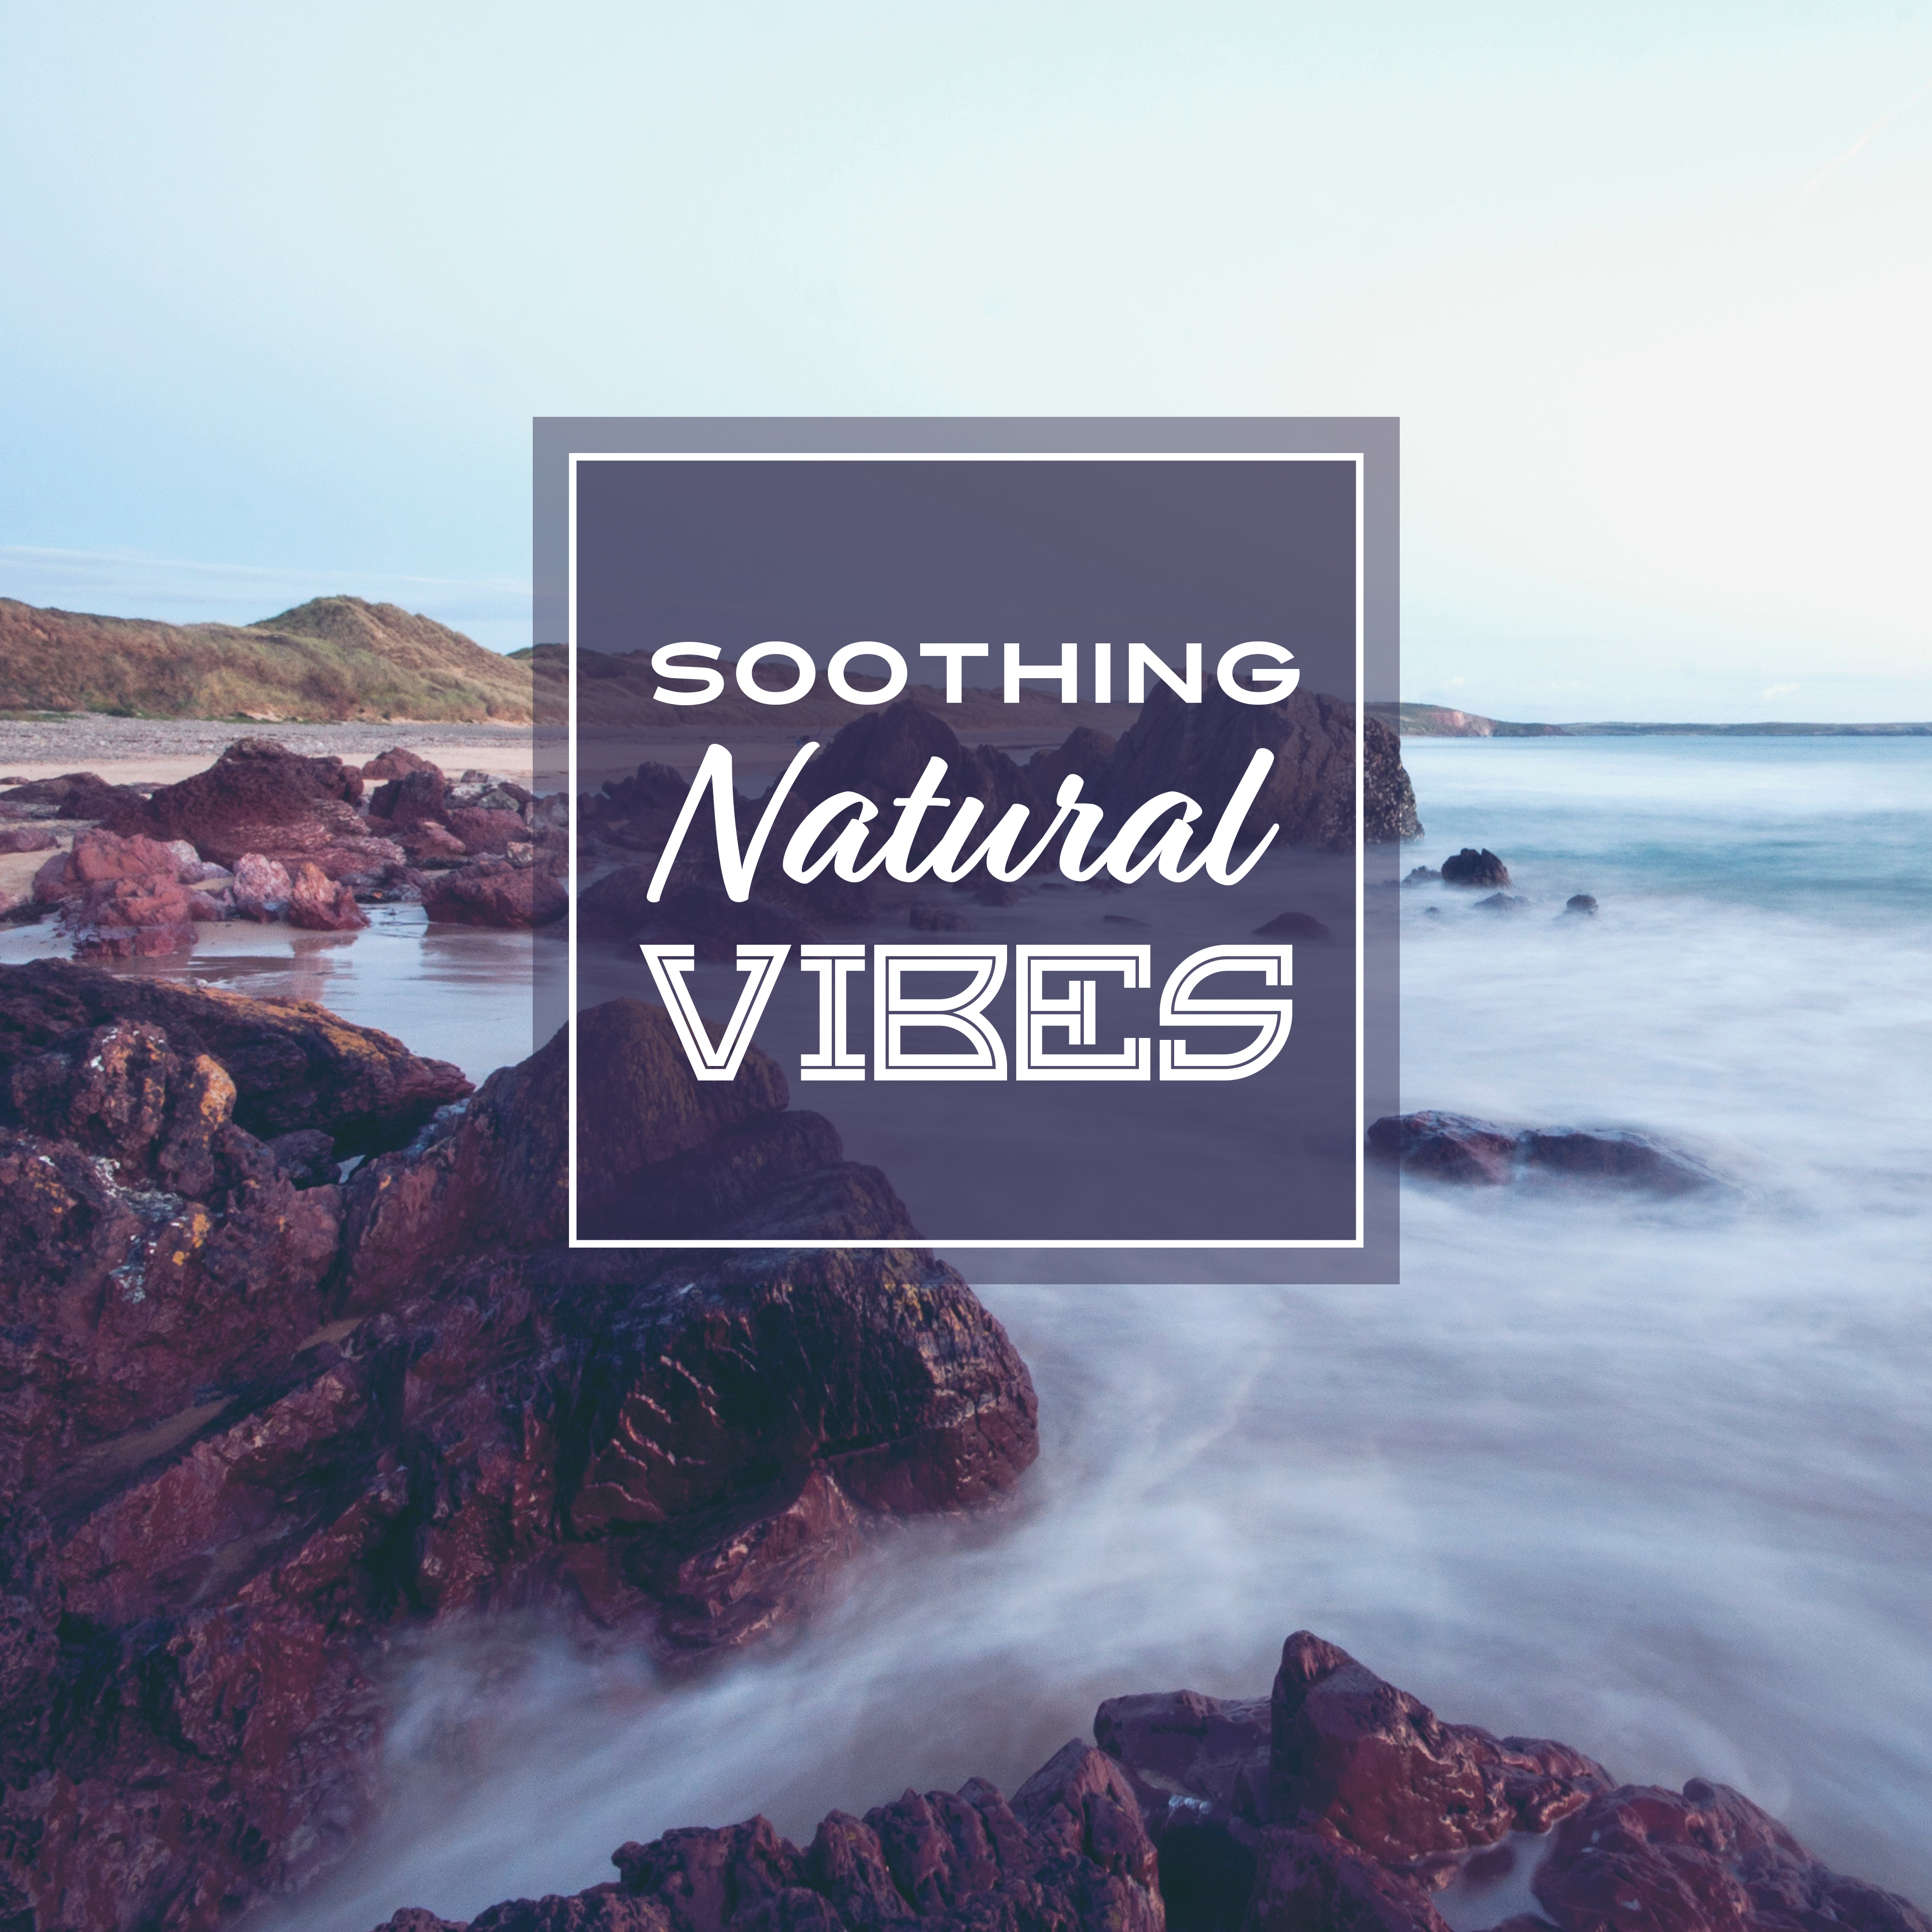 Soothing Natural Vibes